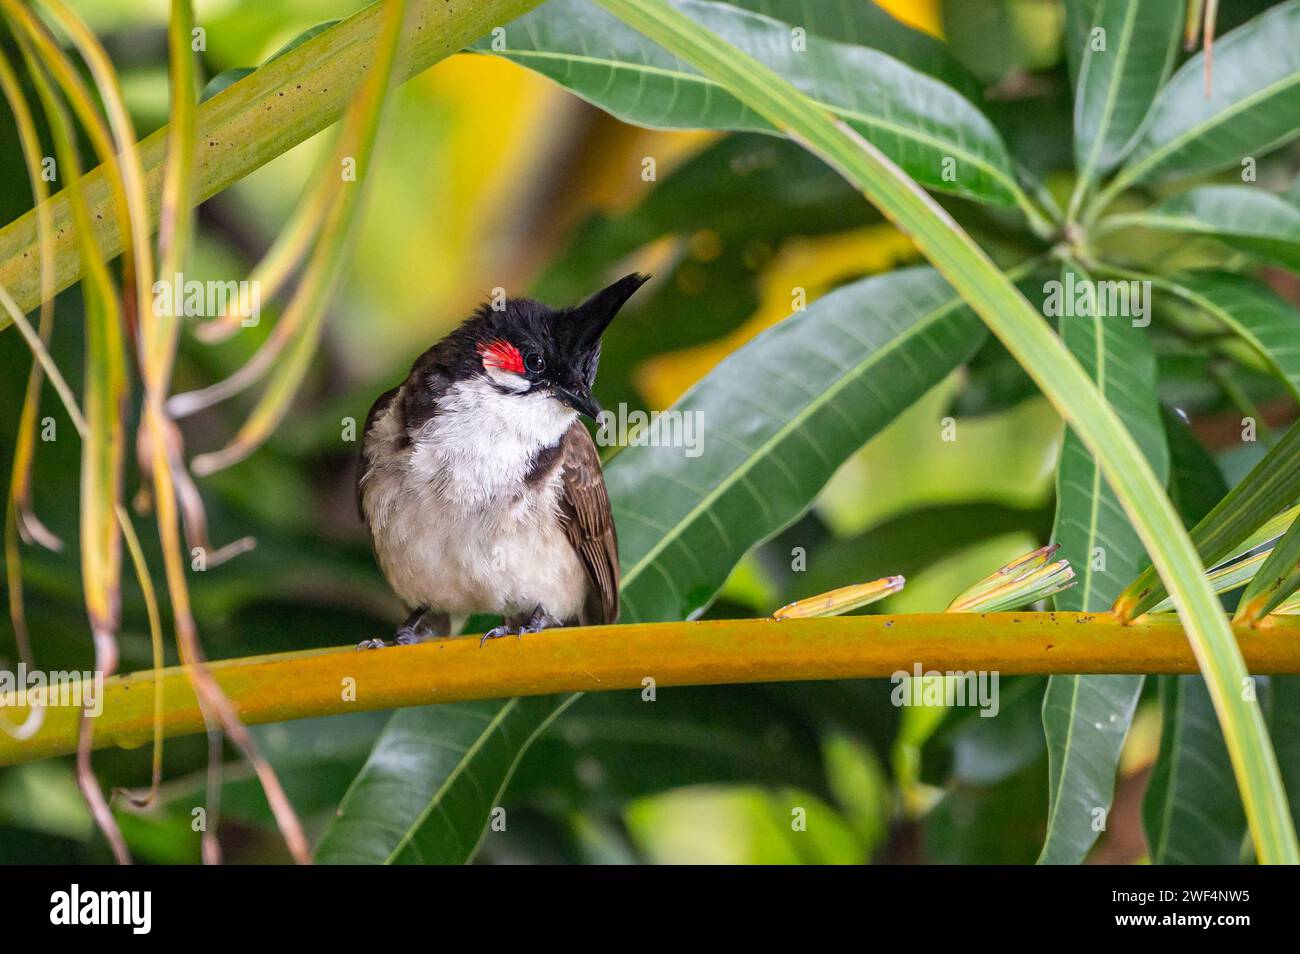 Red-whiskered bulbul bird, pycnonotus jocosus, perched on tropical branch stem, Mauritius, East Africa Stock Photo